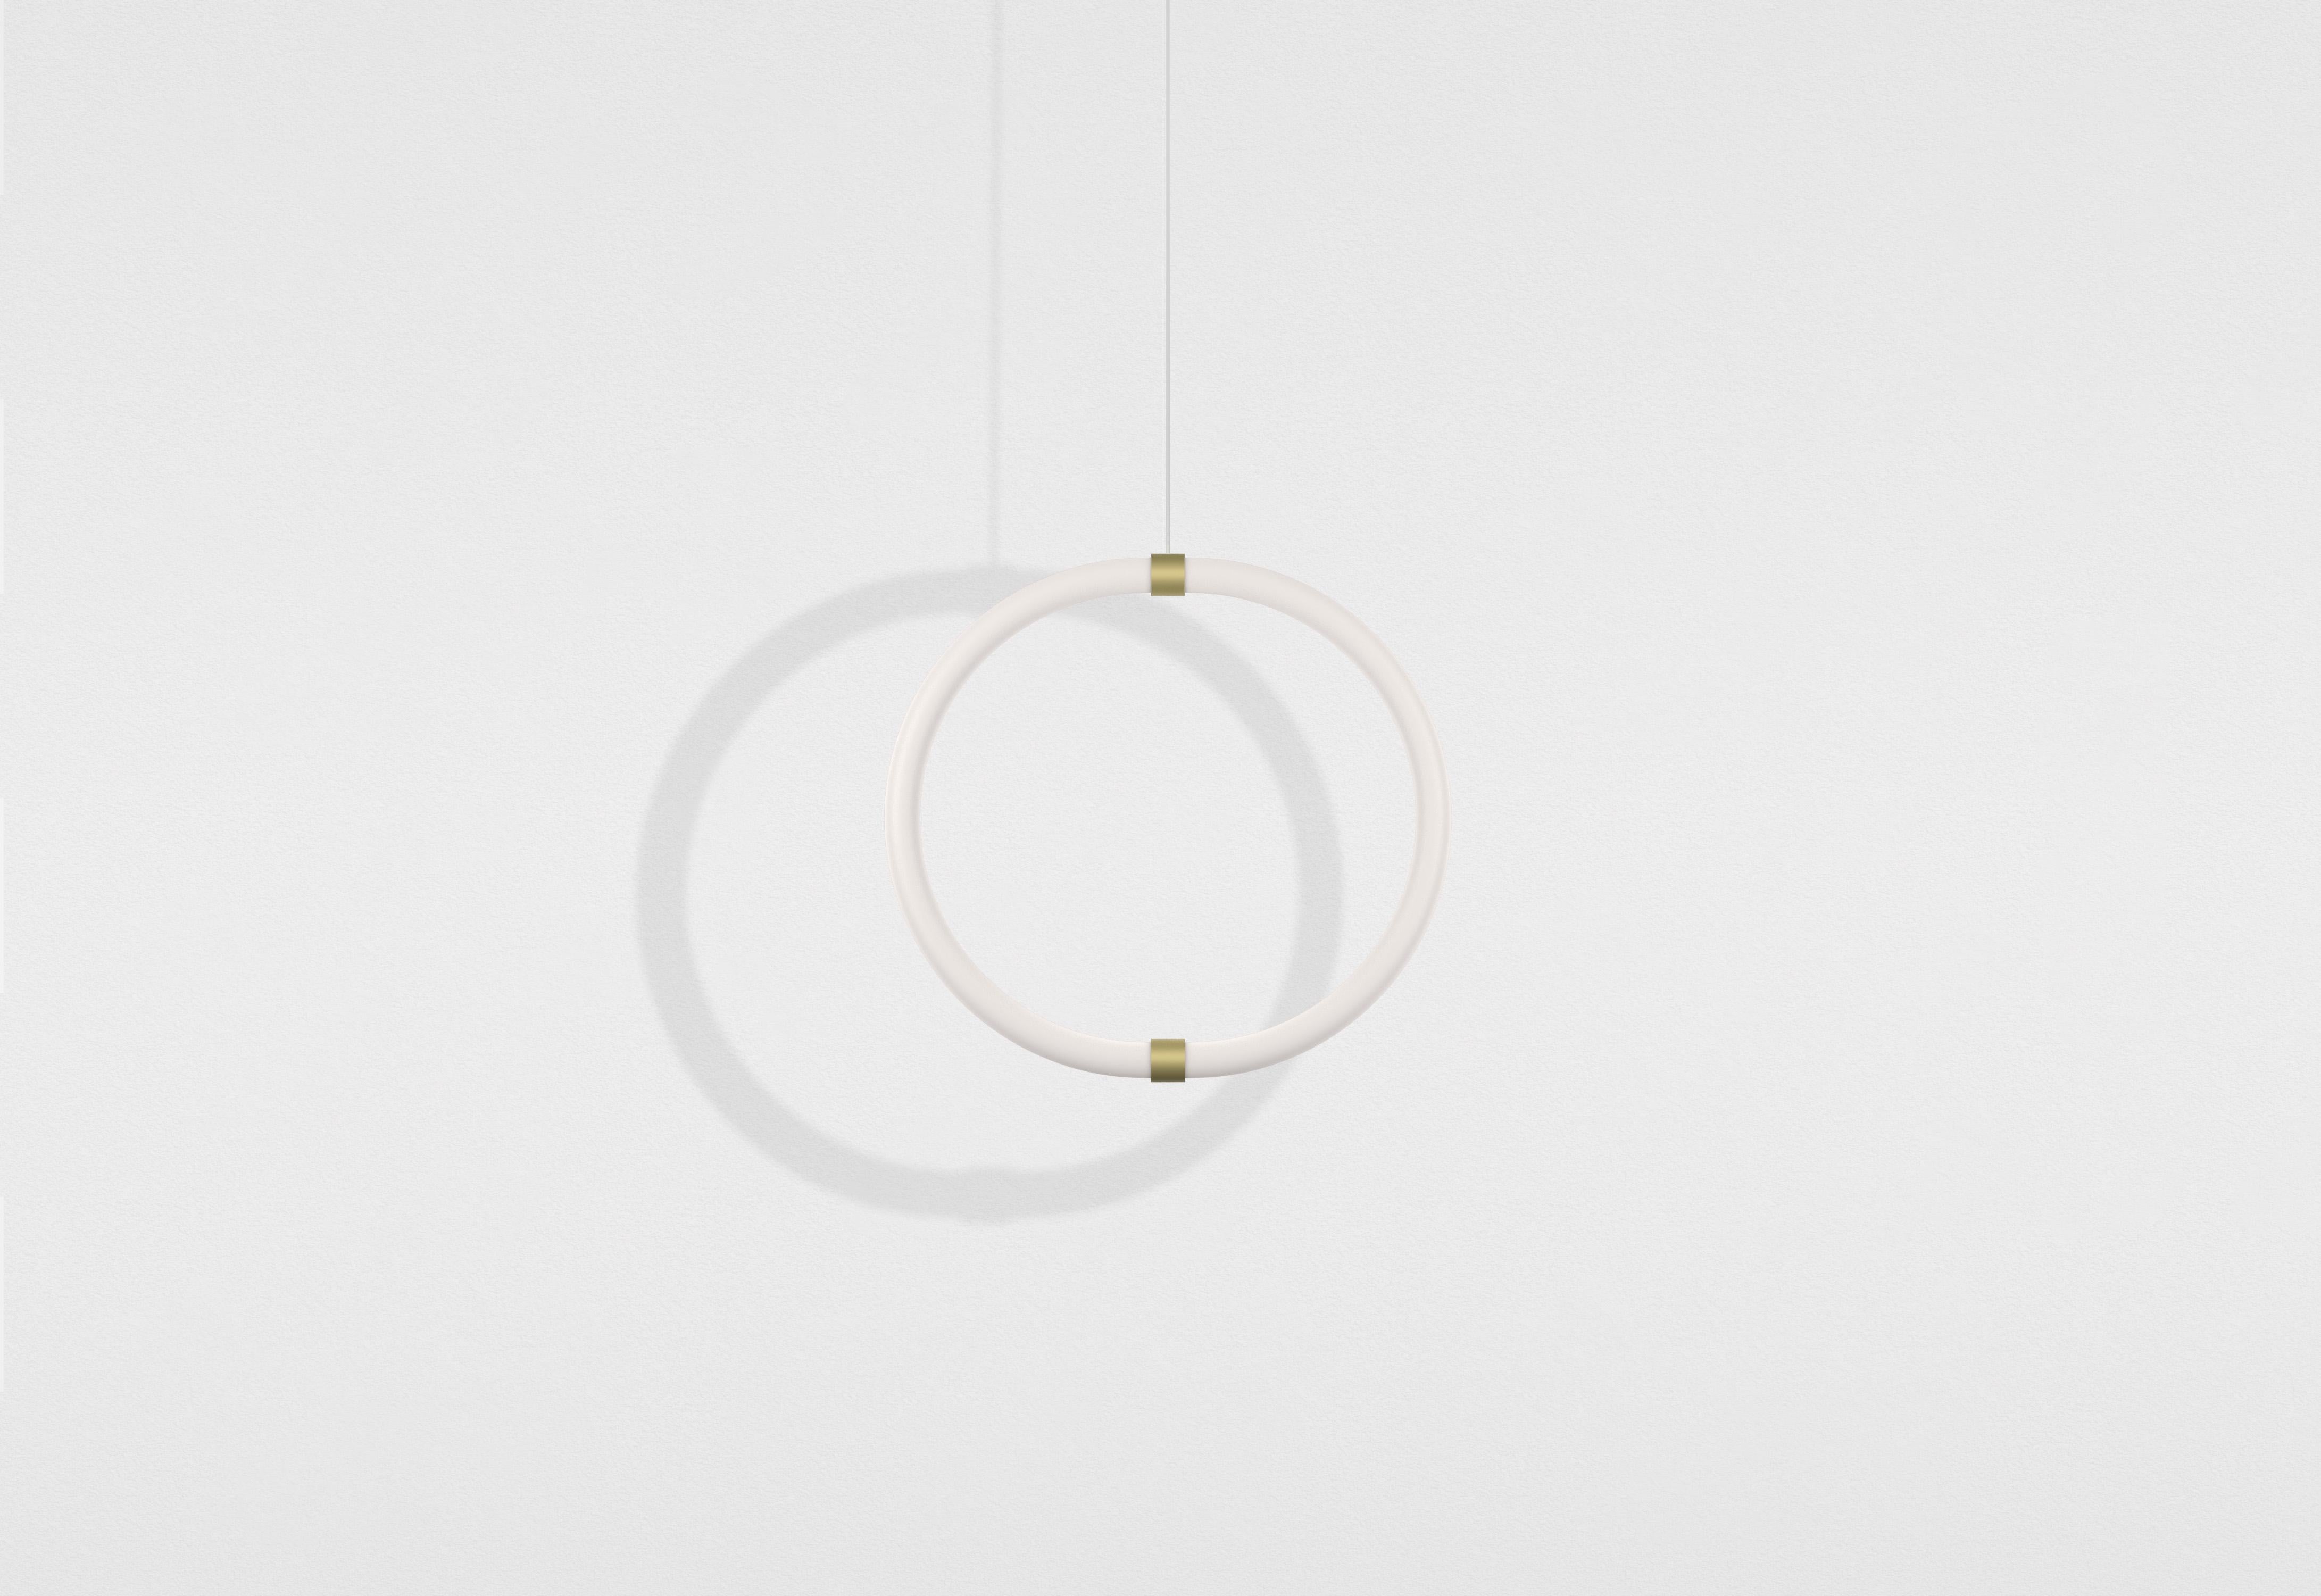 Contemporary Petite Friture Unseen Pendant Lamp O in Brass Transluscent with Curved LED-Light For Sale